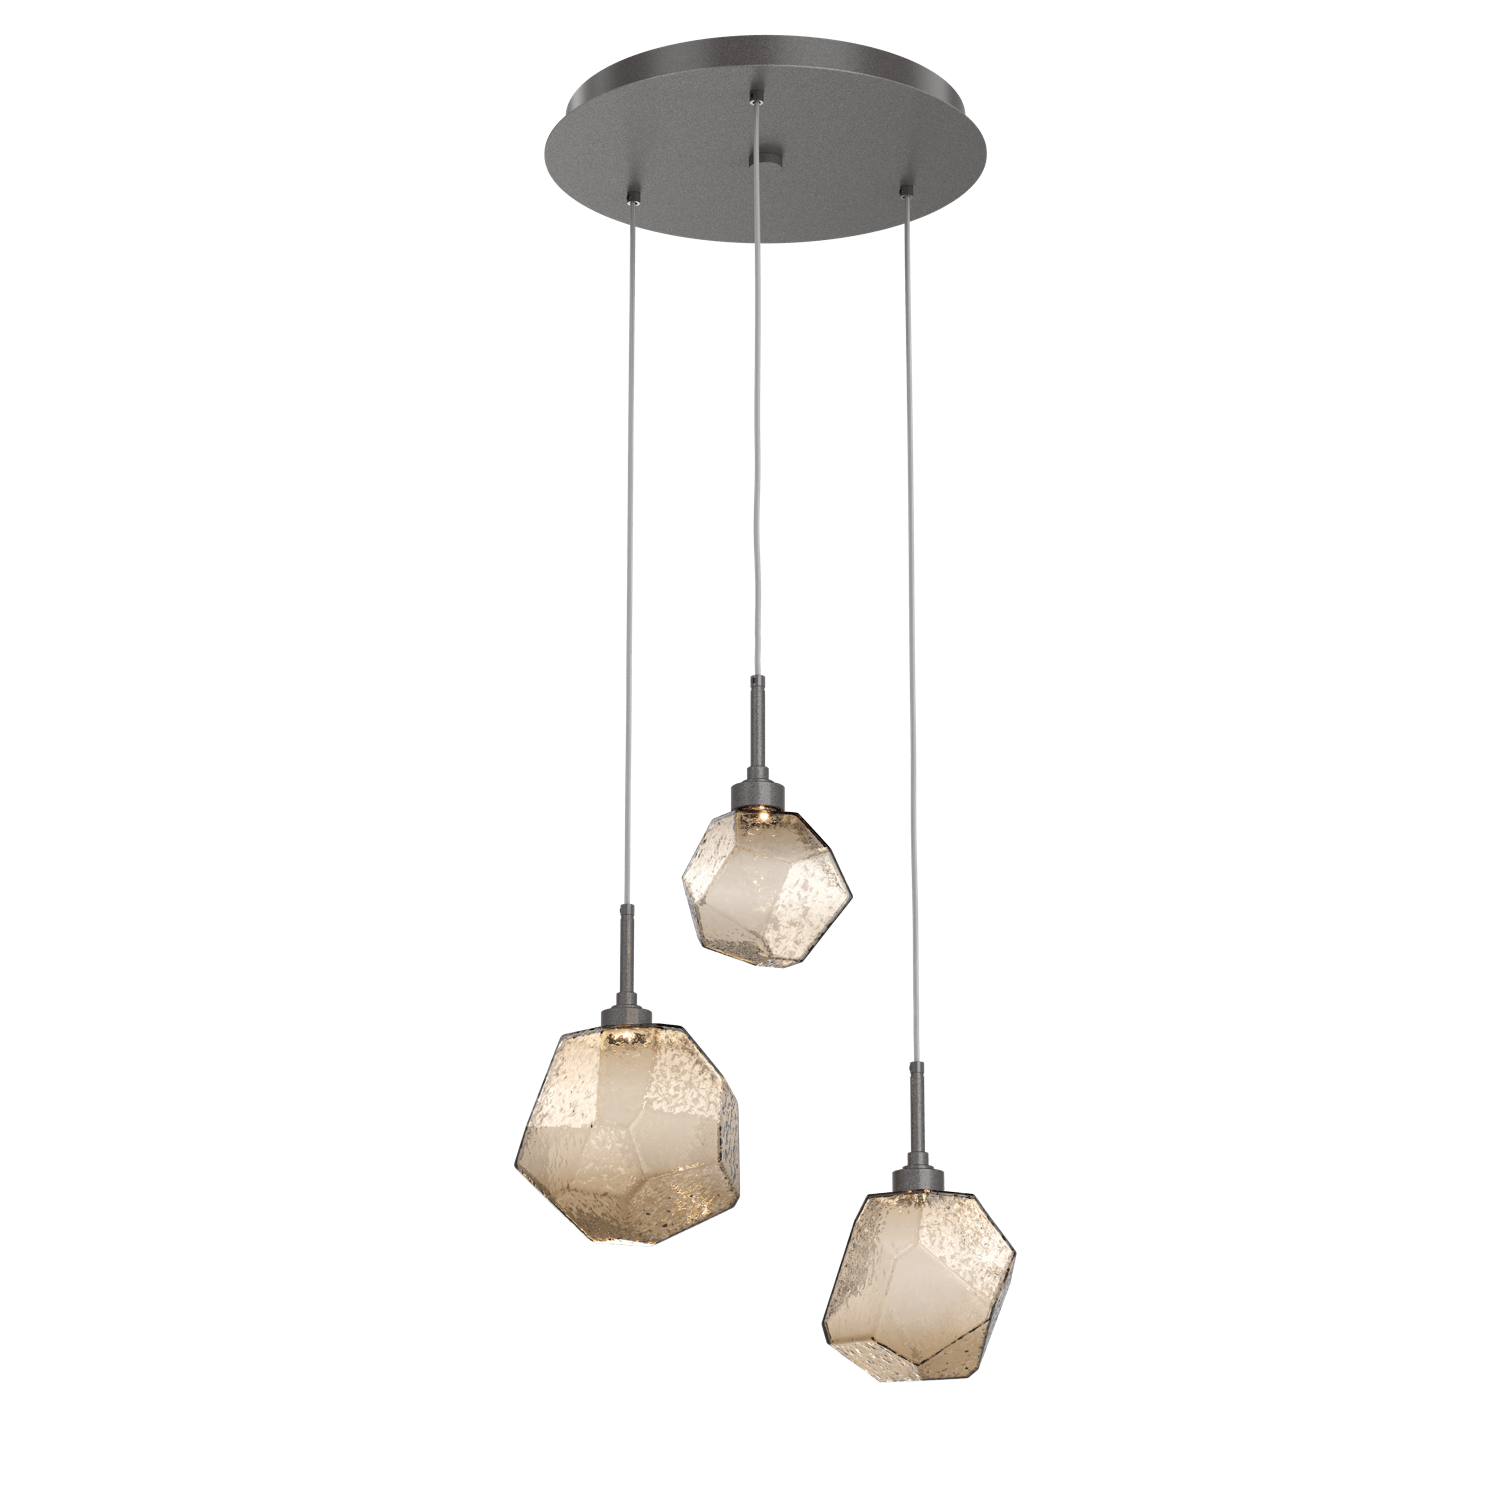 CHB0039-03-GP-B-Hammerton-Studio-Gem-3-light-round-pendant-chandelier-with-graphite-finish-and-bronze-blown-glass-shades-and-LED-lamping